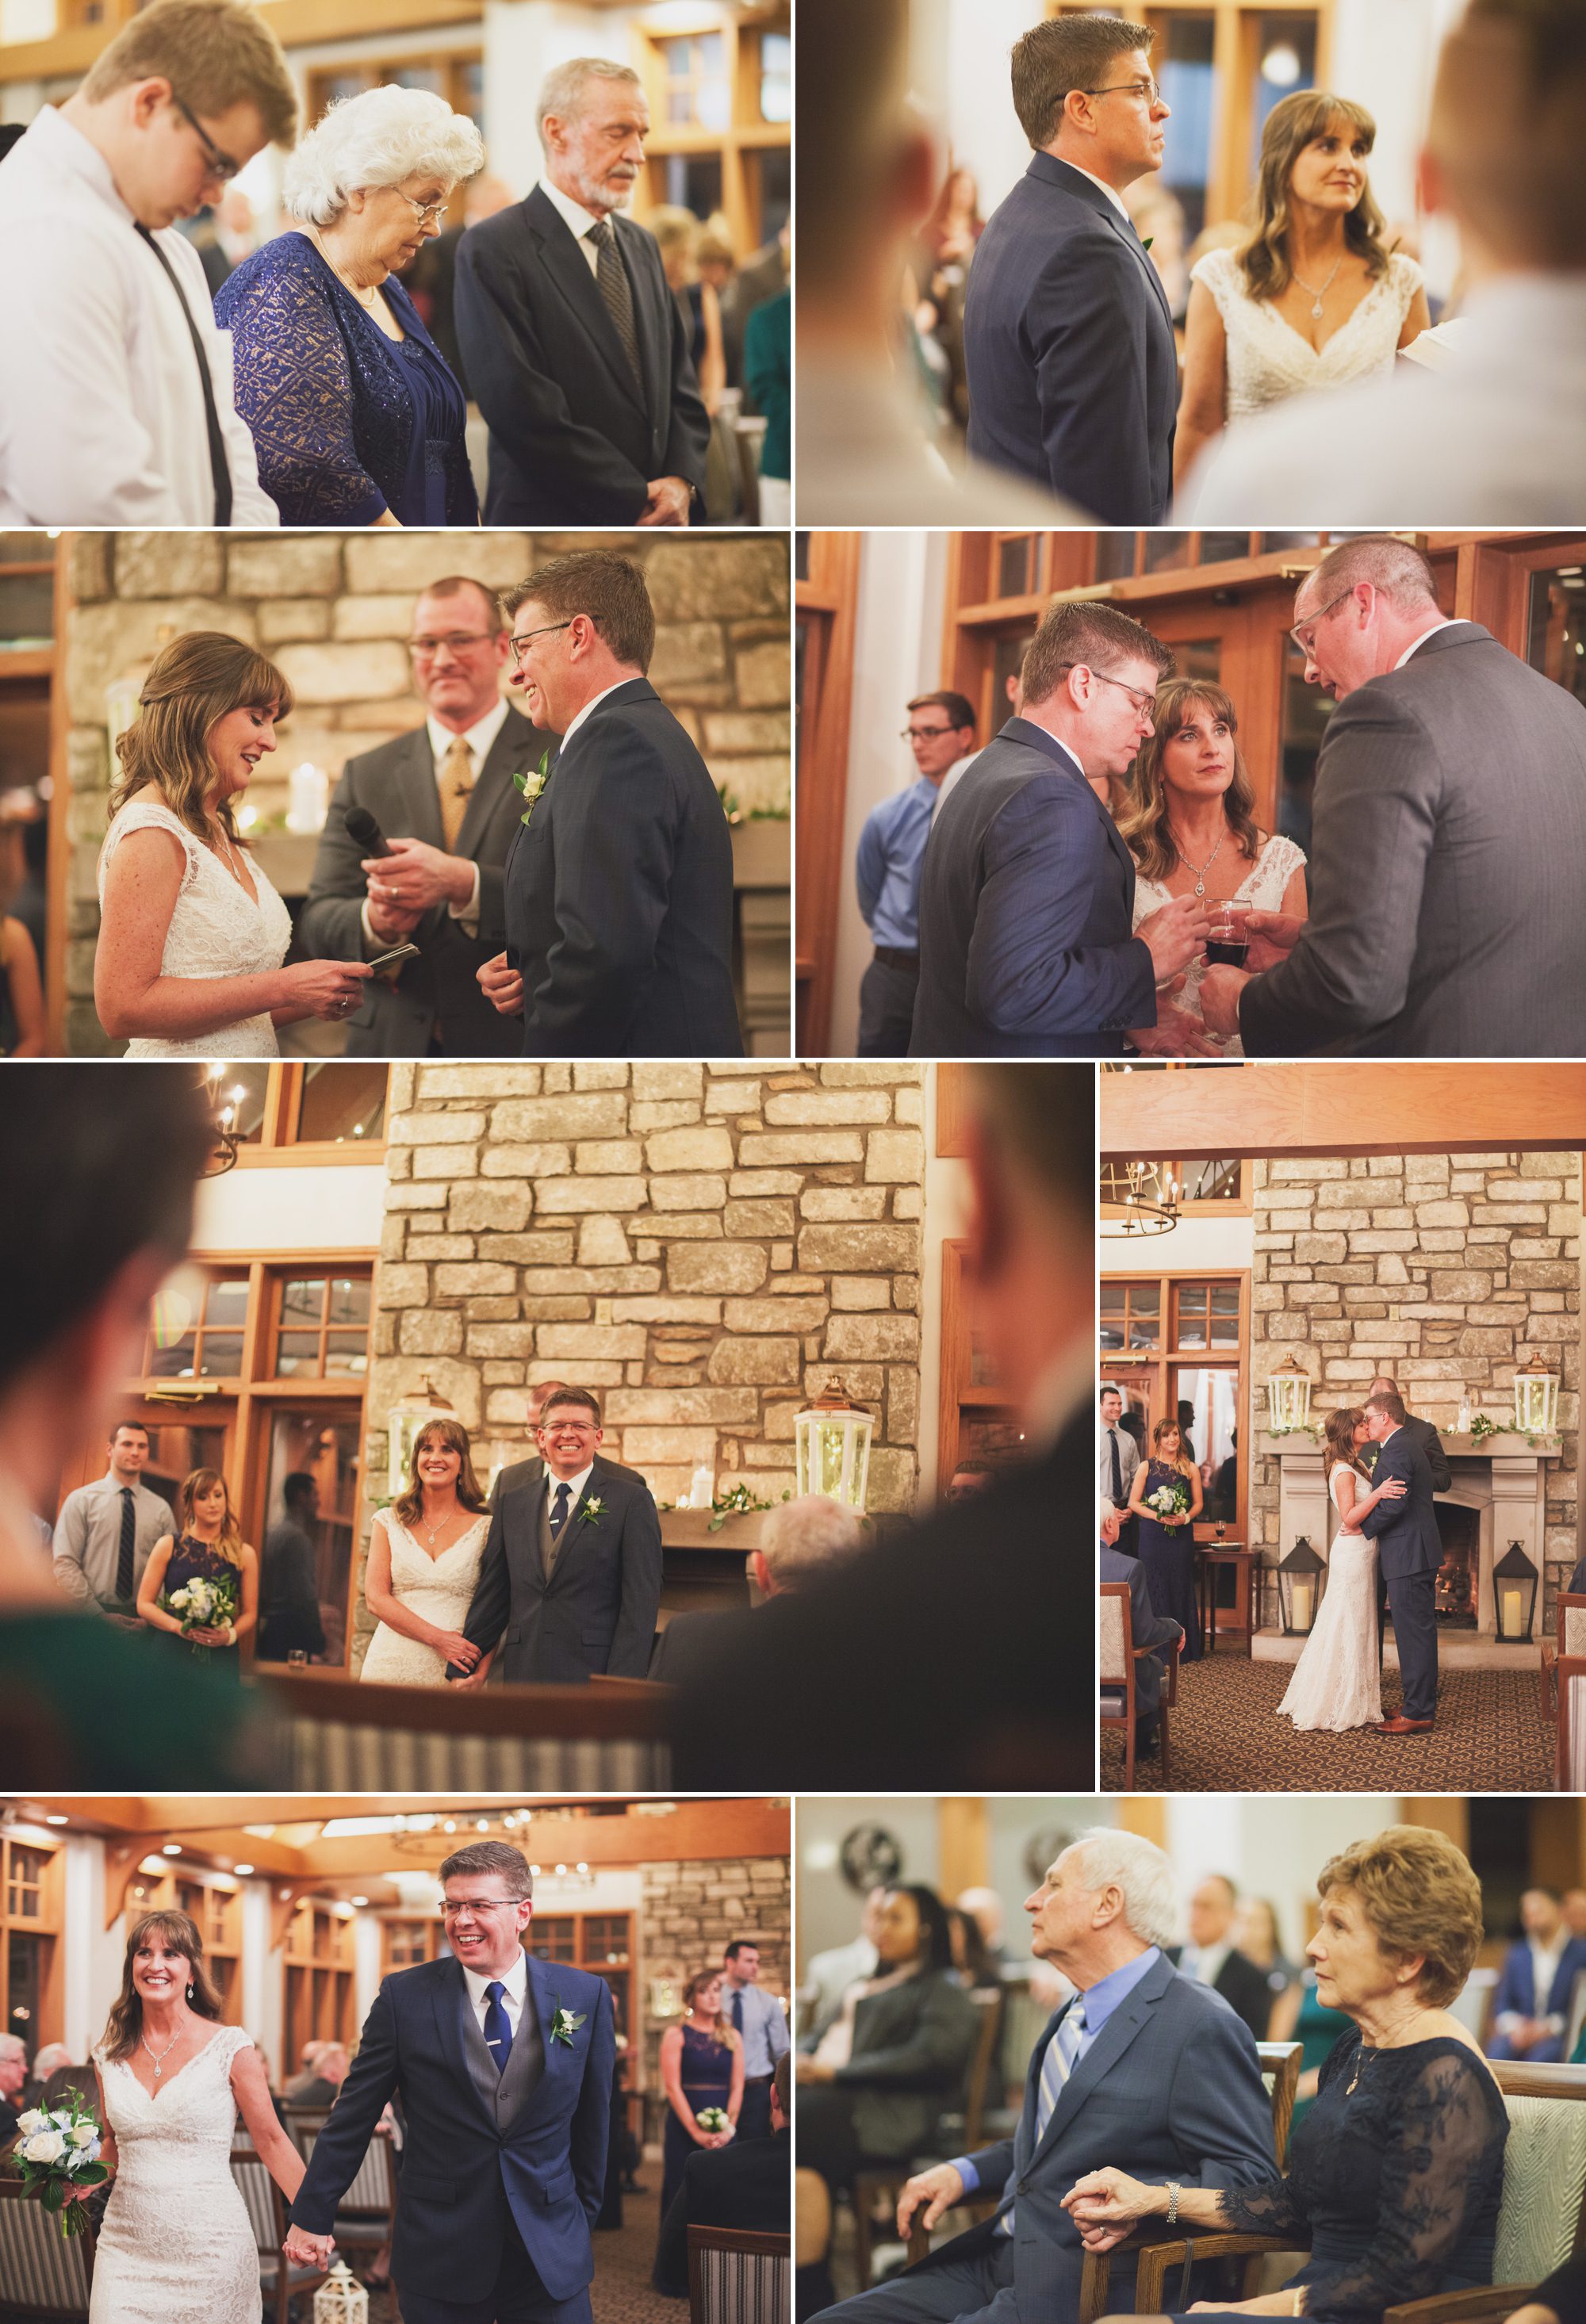 Wedding ceremony in clubhouse. Winter wedding at Vanderbilt Legends Golf Course in Brentwood TN, photos by Krista Lee Photography